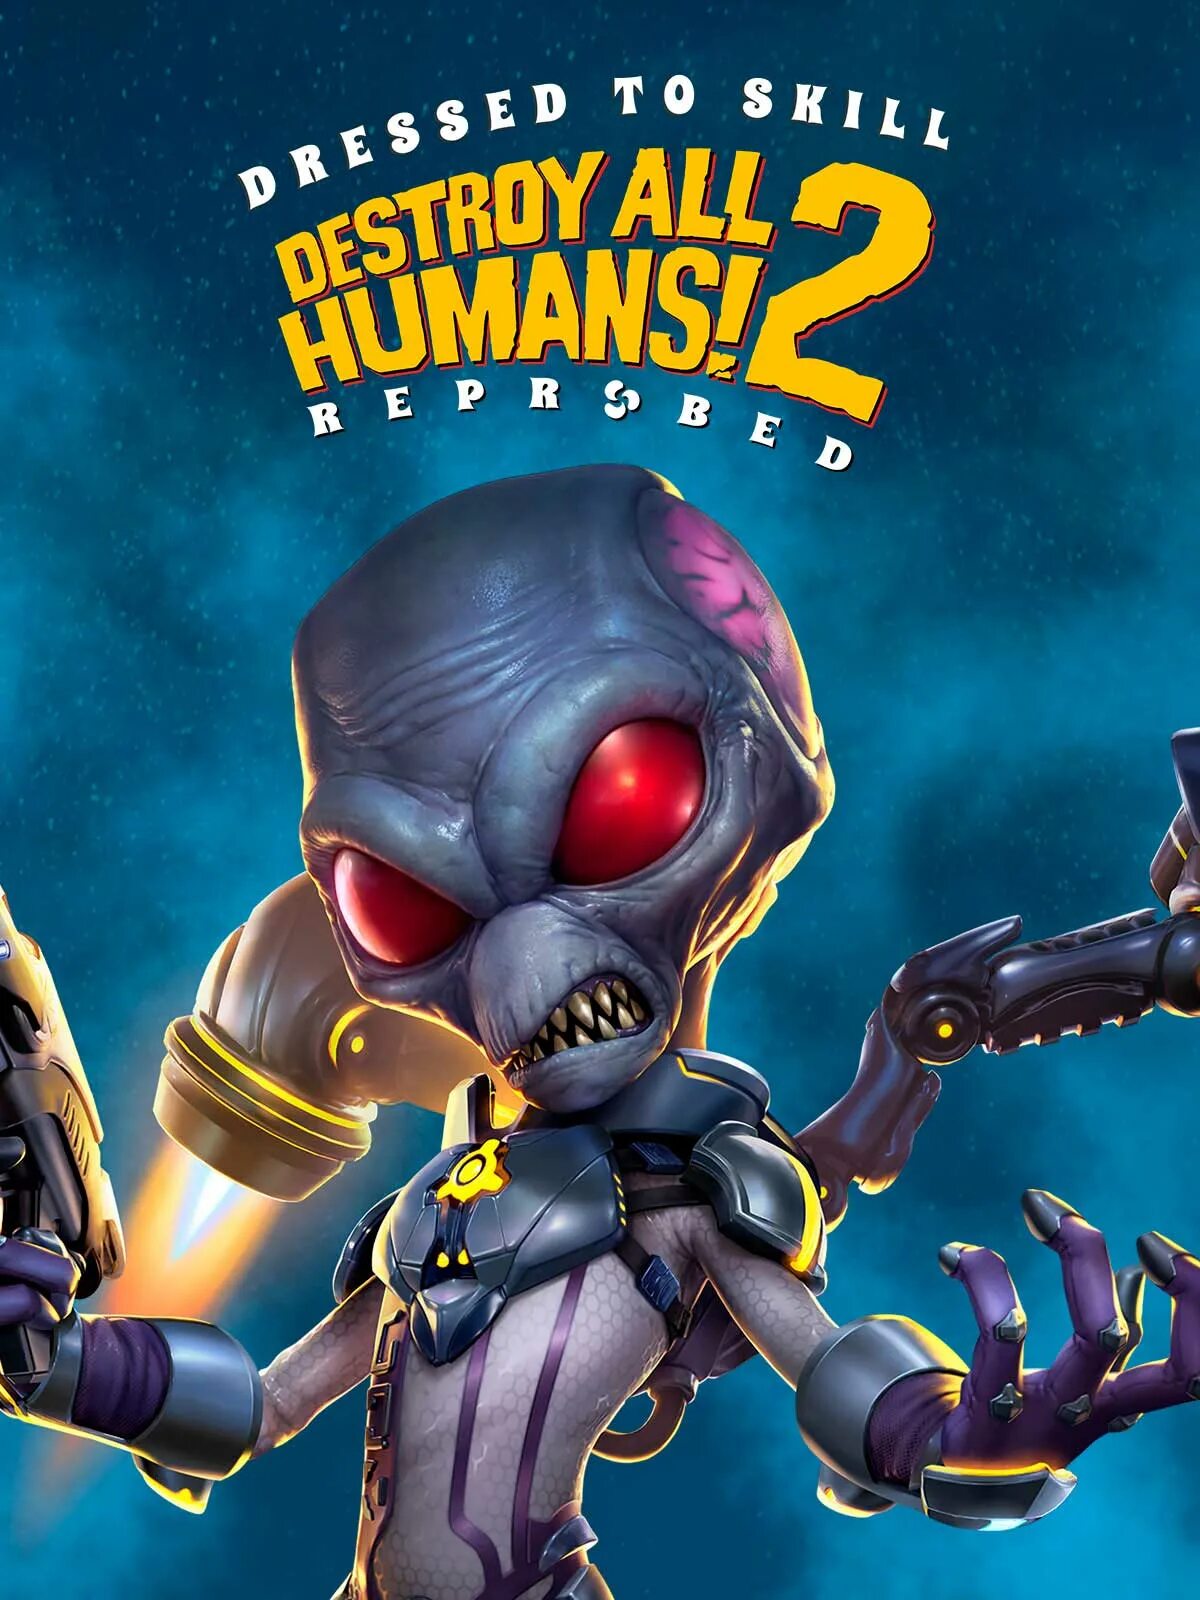 Destroy all Humans 2 reprobed. Destroy all Humans!. Destroy all Humans! 2 - Reprobed: Dressed to skill Edition. Destroy all Humans reprobed. All humans 2 reprobed